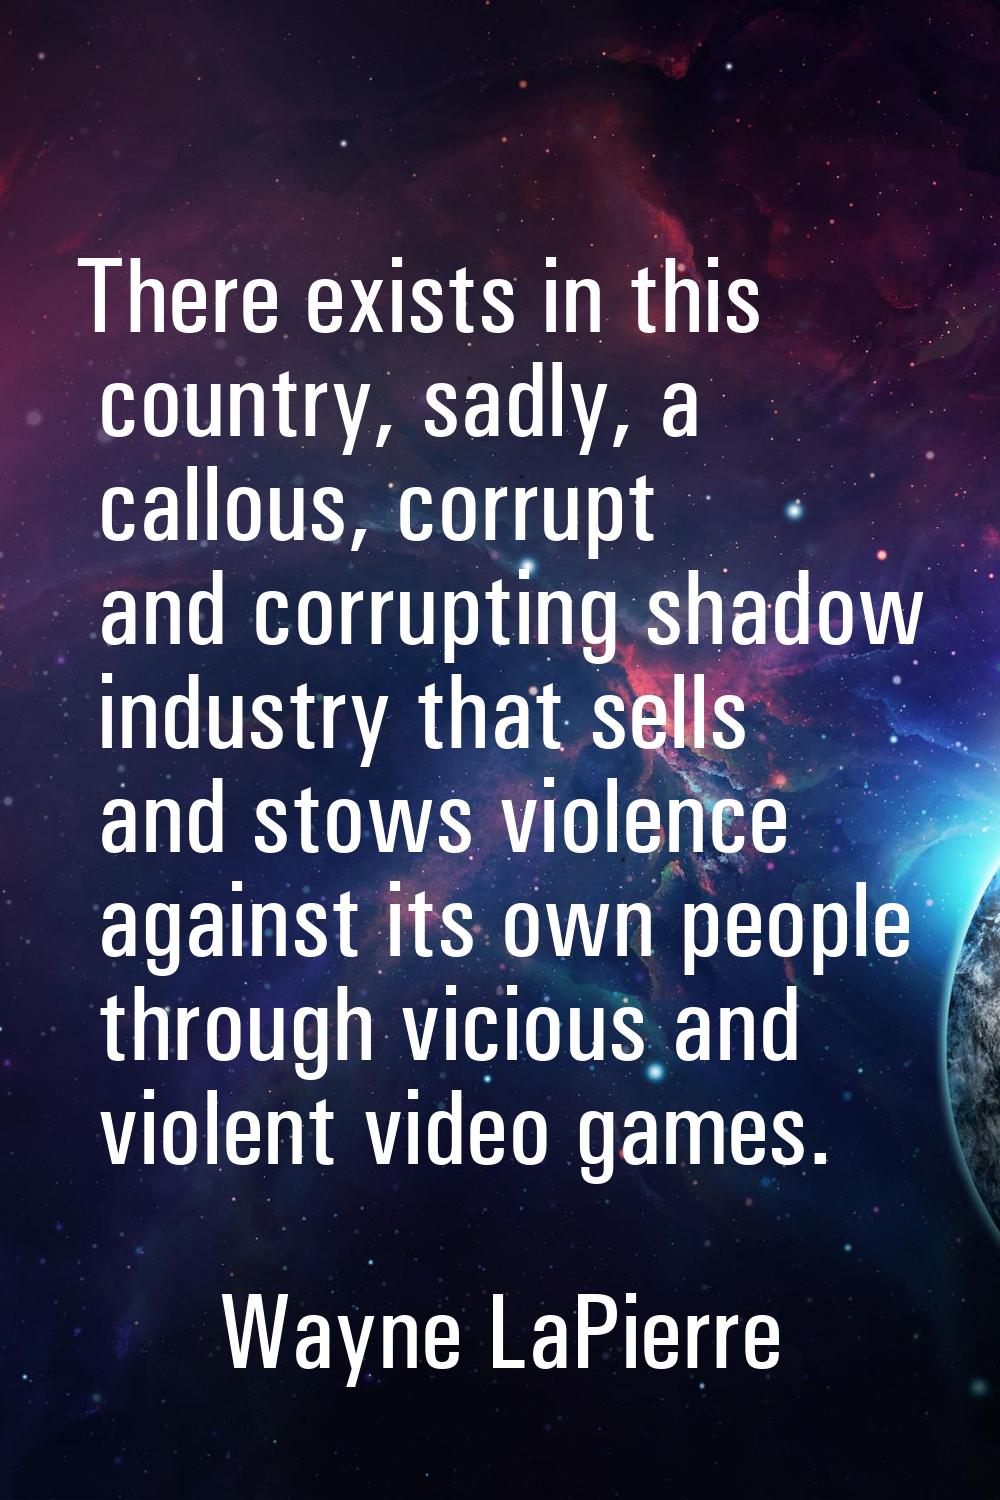 There exists in this country, sadly, a callous, corrupt and corrupting shadow industry that sells a